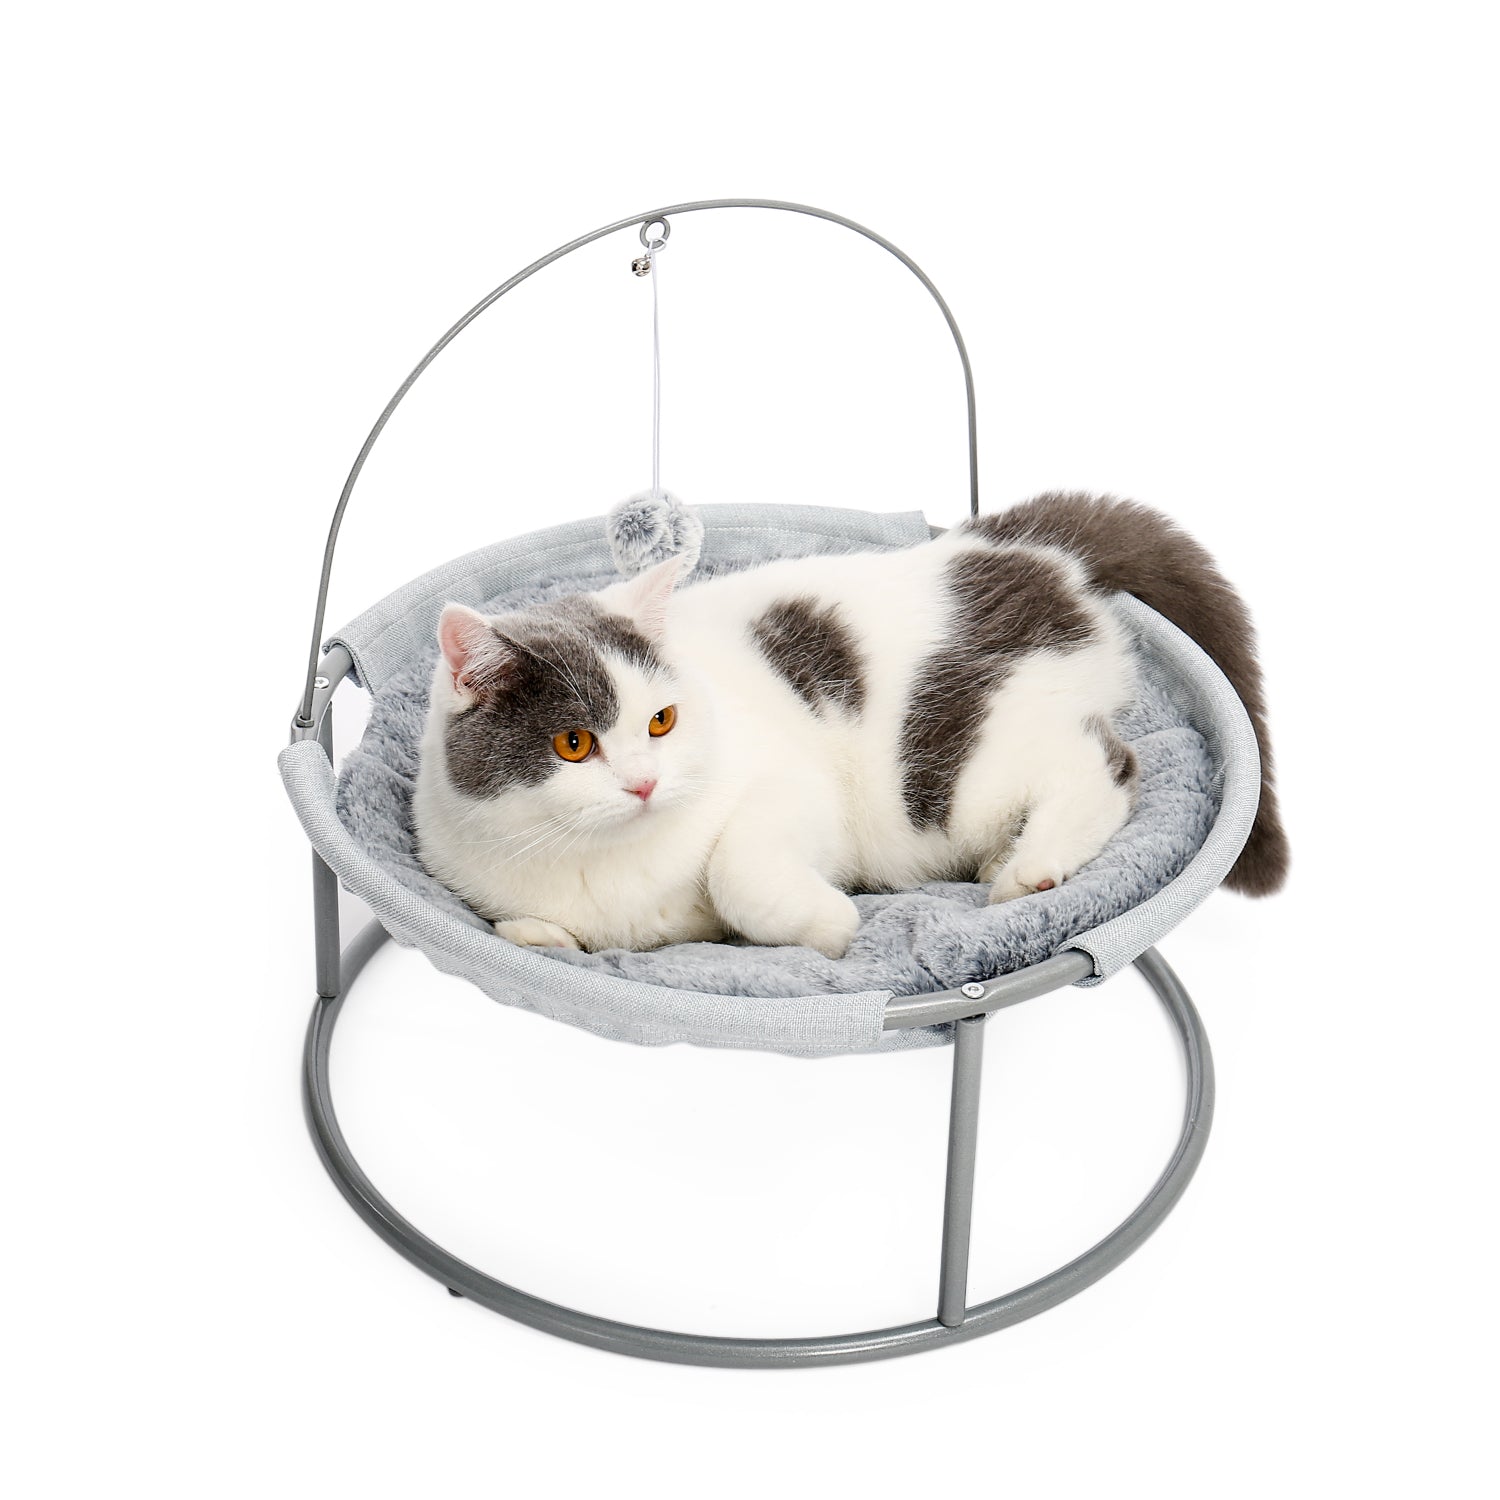 Cat Bed Soft Plush Cat Hammock with Dangling Ball for Cats, Small Dogs Gray - TOYSHIP